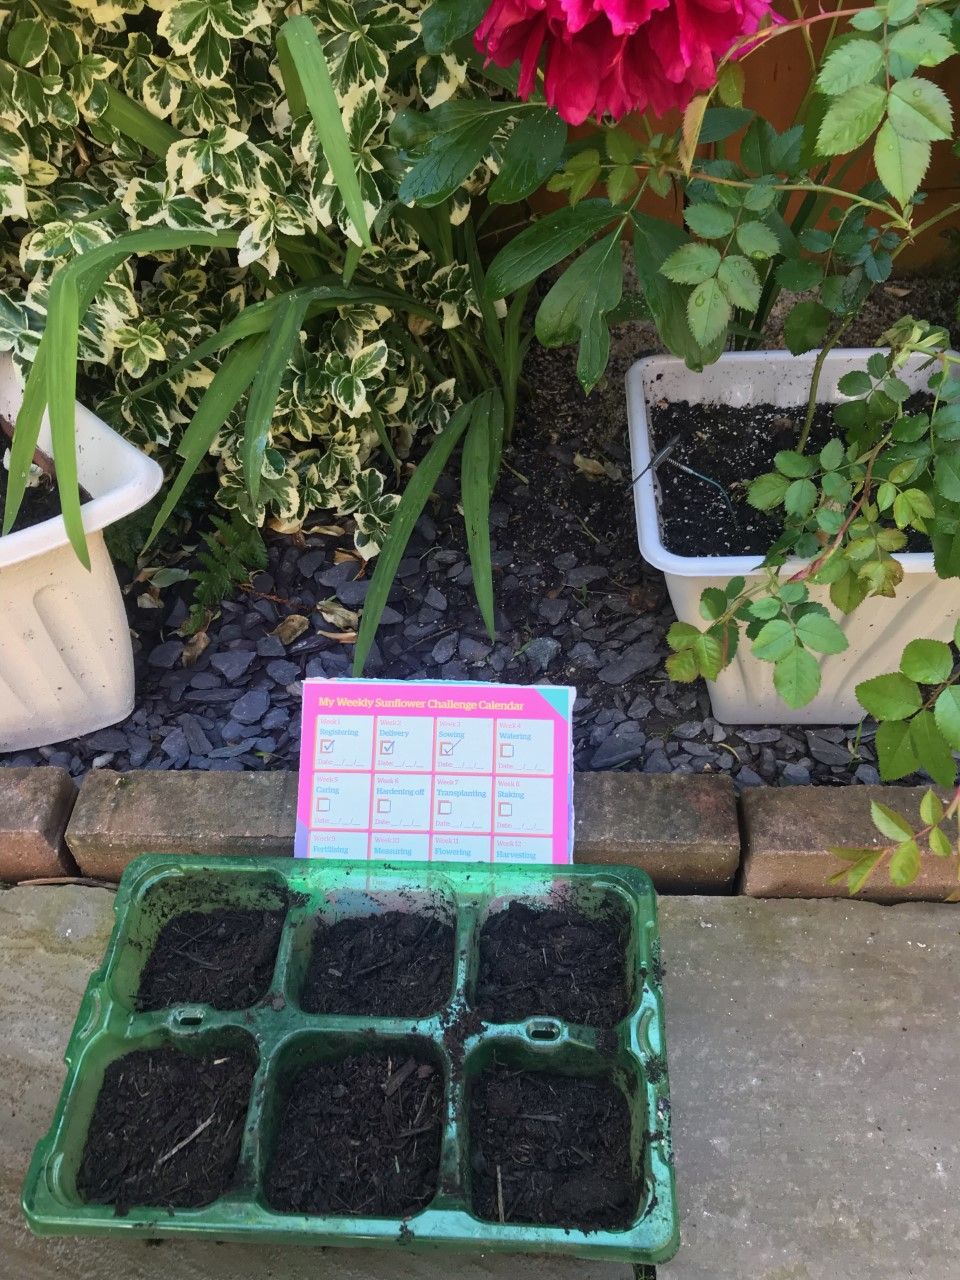 Jackie L - All planted and watered…… here goes